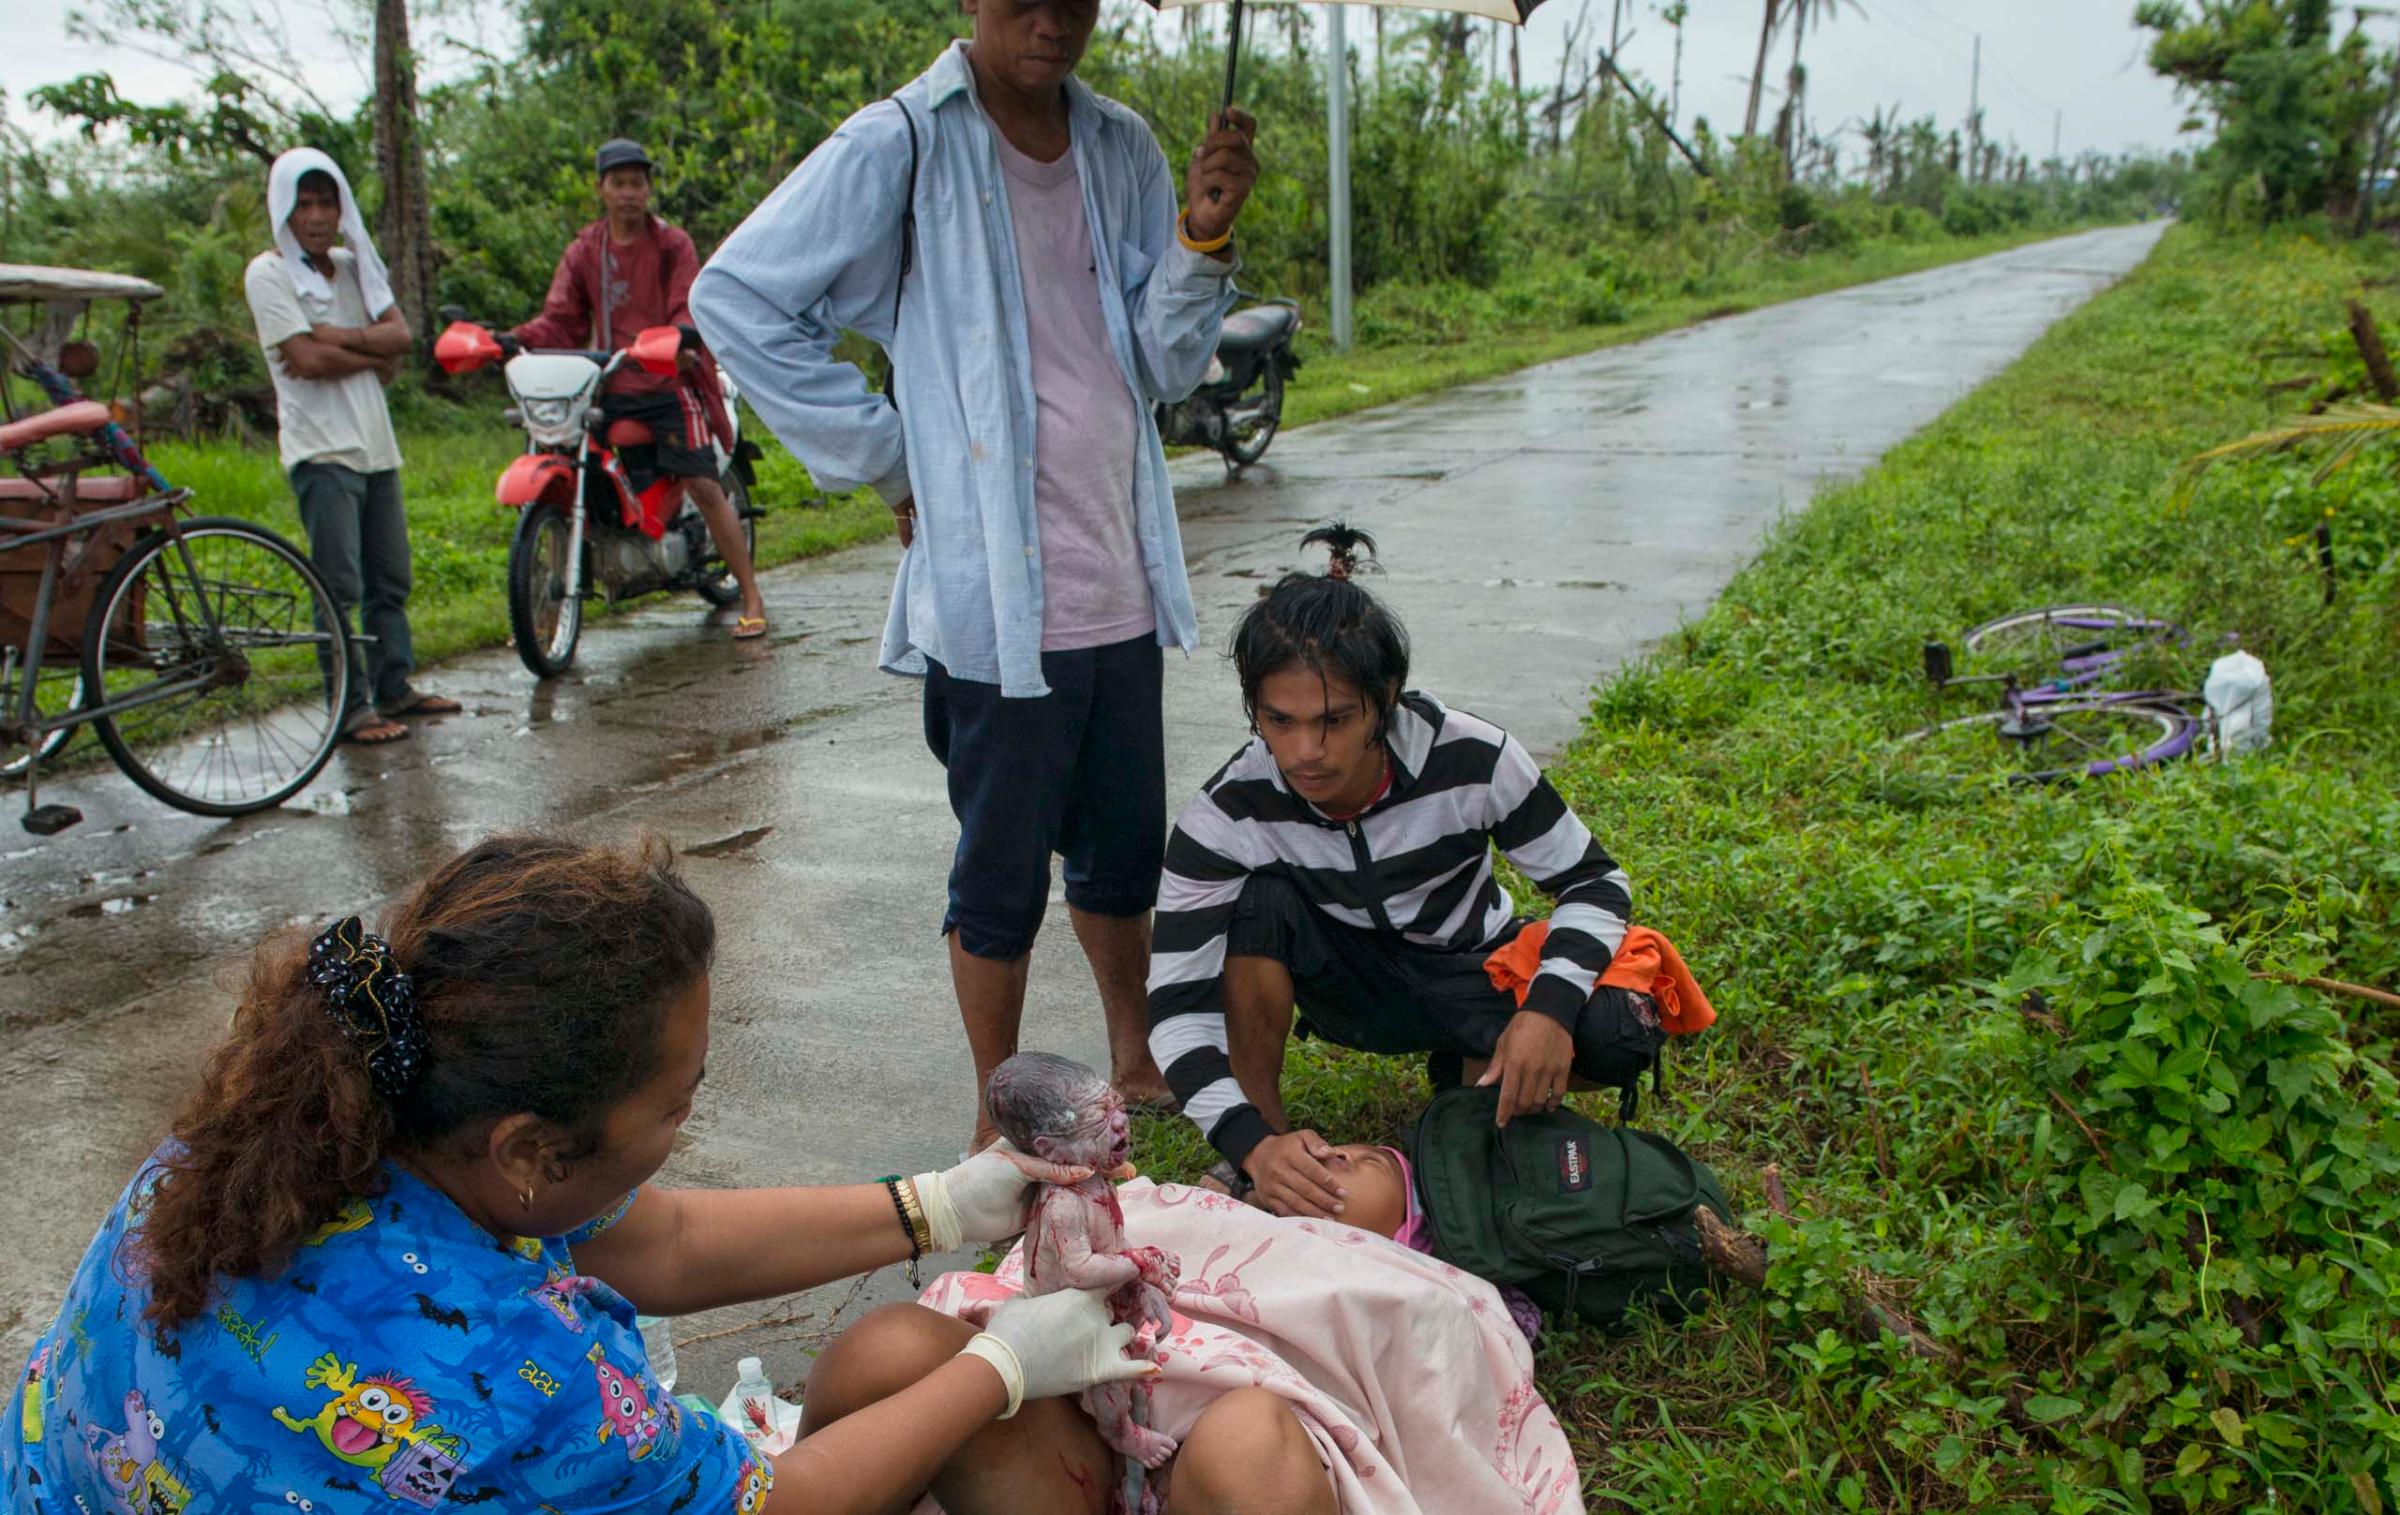 Jan. 11, 2014: Analyn Pesado, 18, gives birth on the side of the road en route to the nearest clinic in Tolosa, outside of Tacloban.